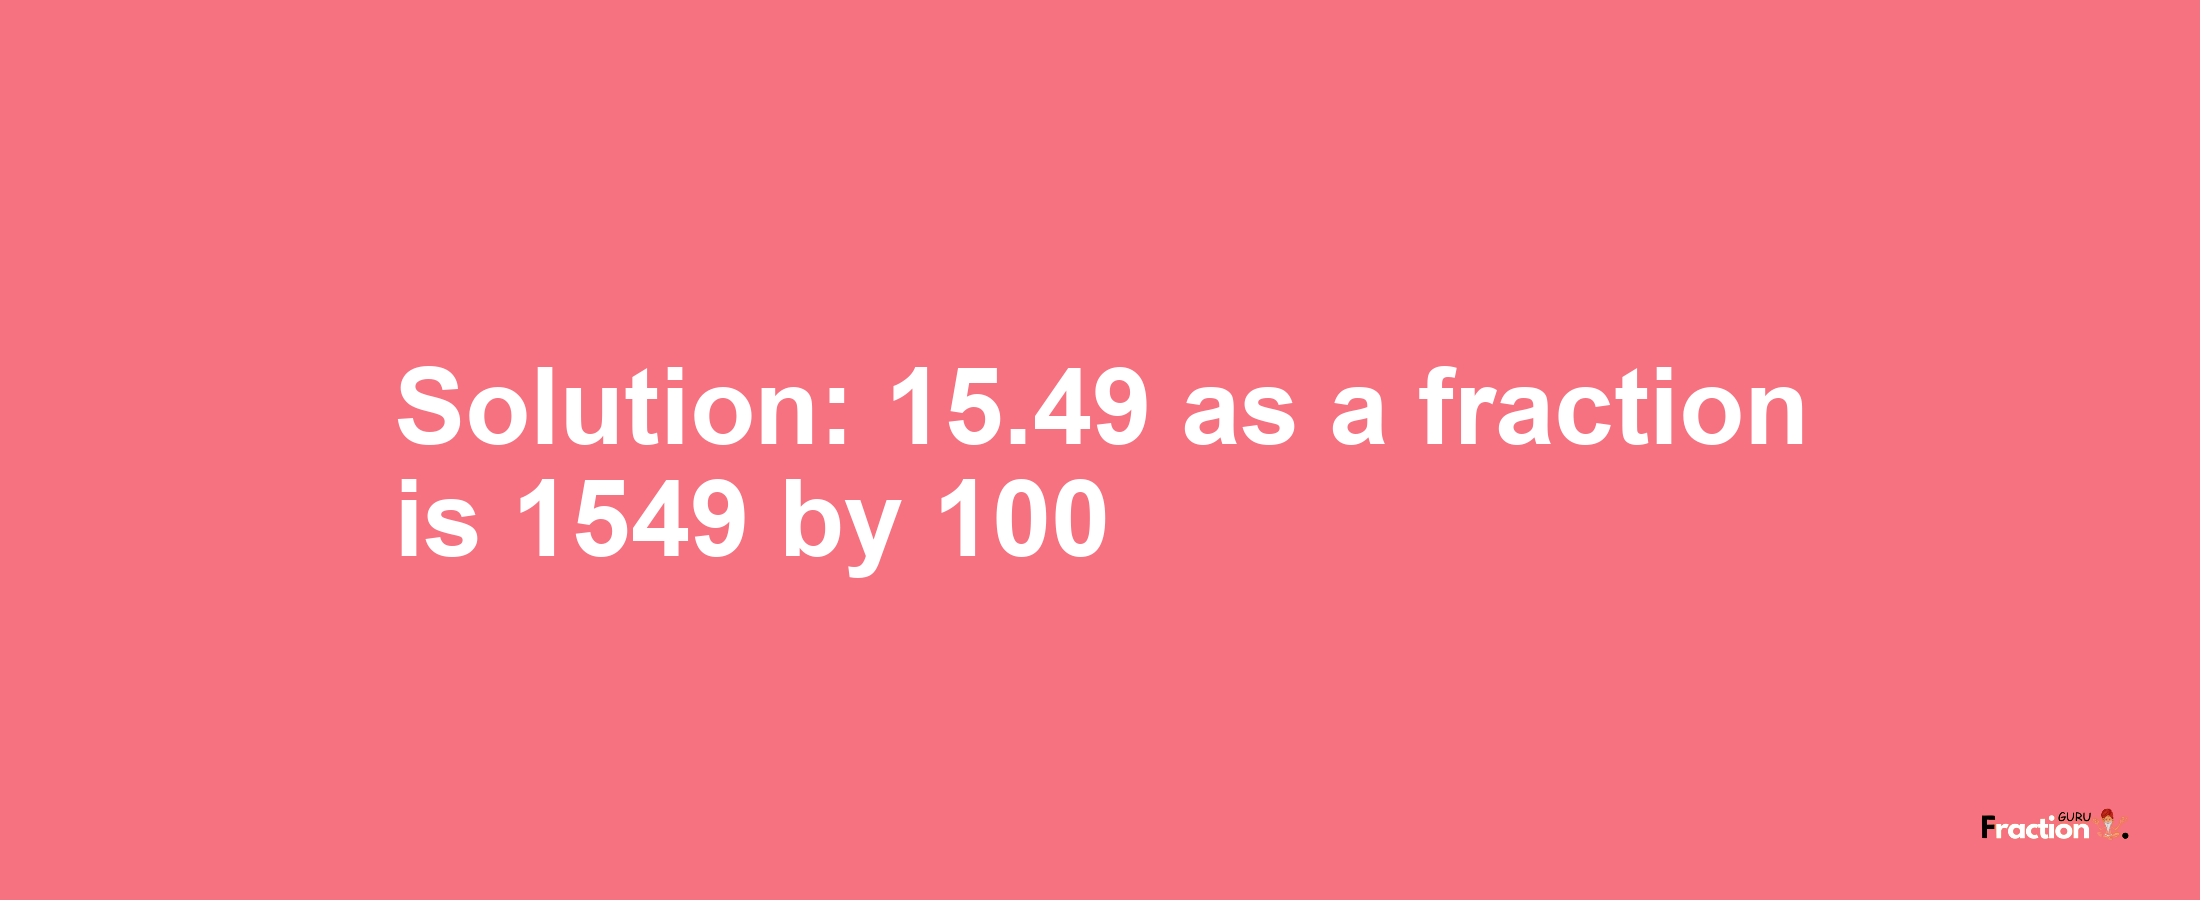 Solution:15.49 as a fraction is 1549/100